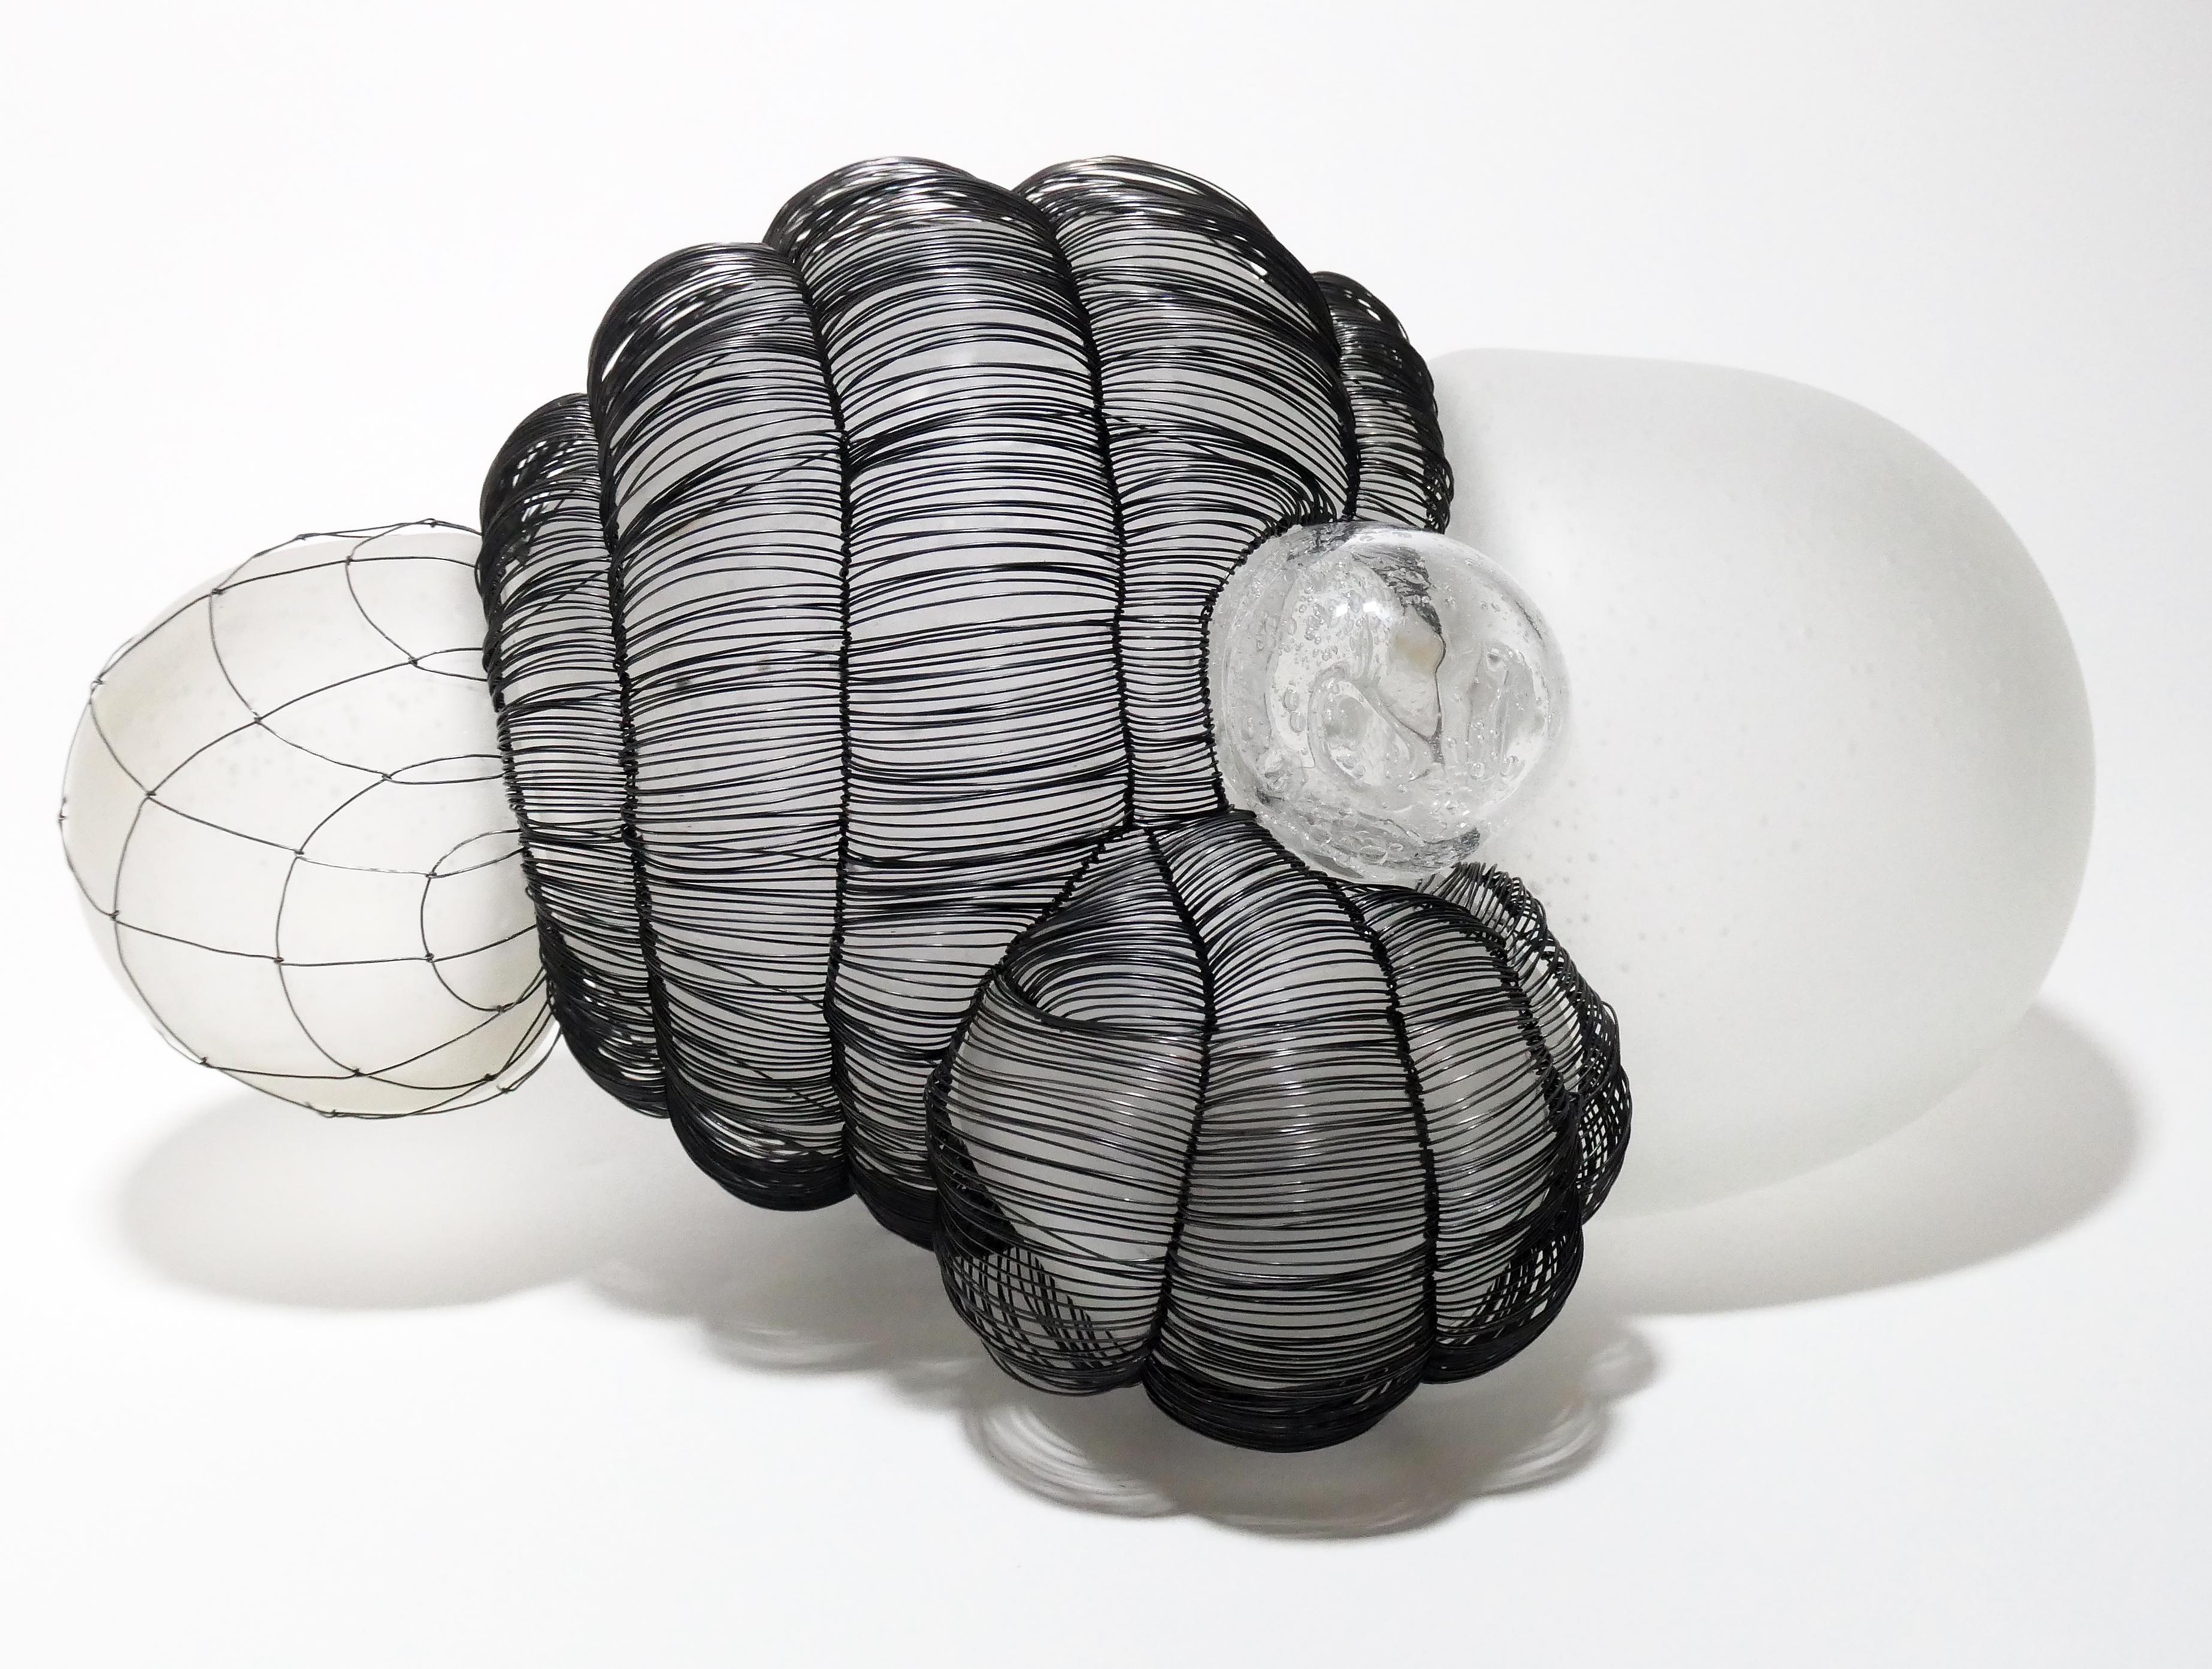 Beth Dary Abstract Sculpture -  Time Passing 1, biomorphic hand-blown glass and woven steel wire sculpture